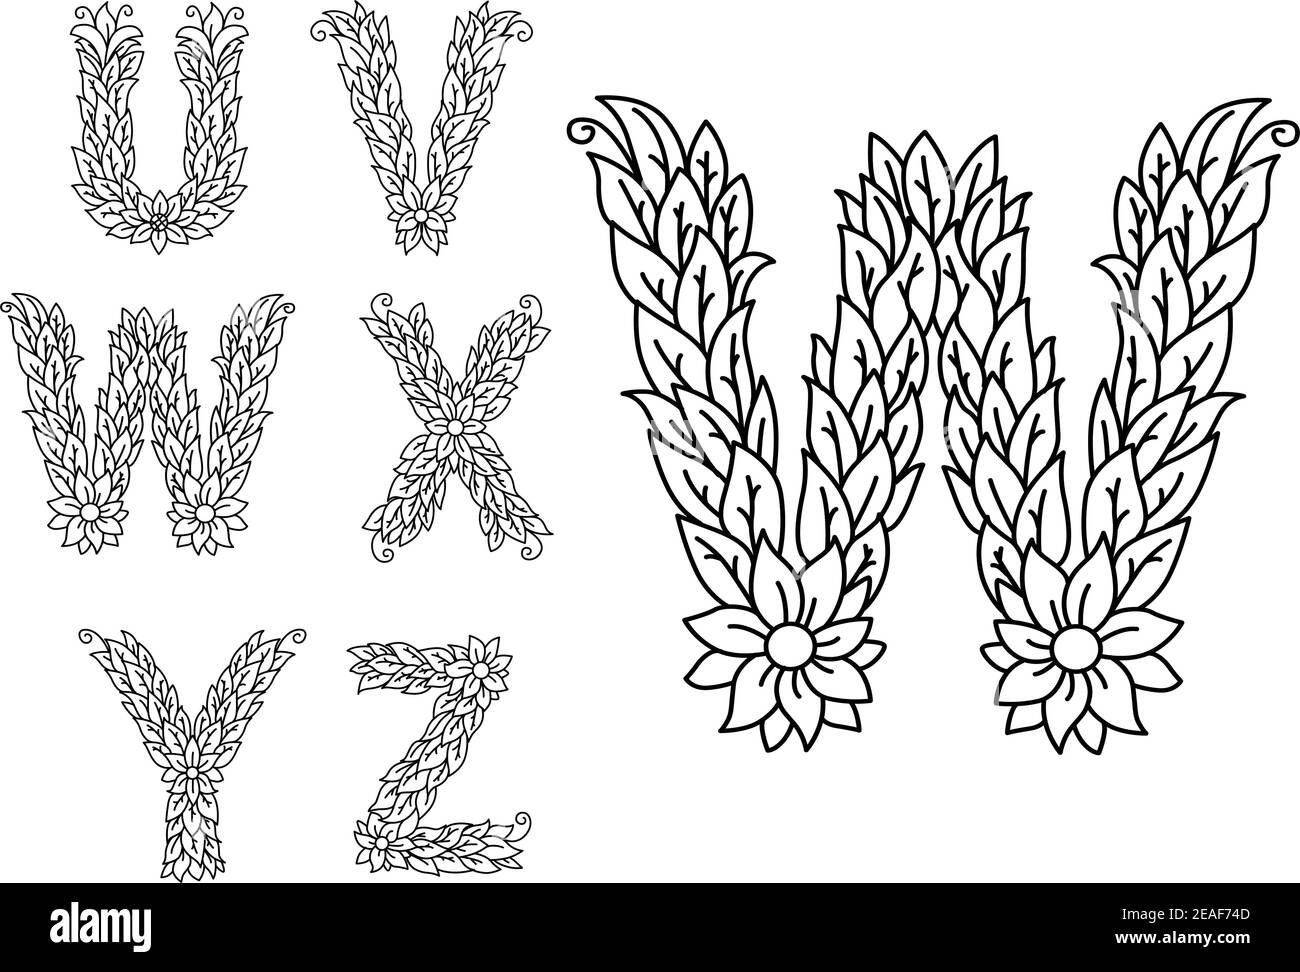 U V W X Y And Z Floral Letters Isolated On White For Design Stock Vector Image And Art Alamy